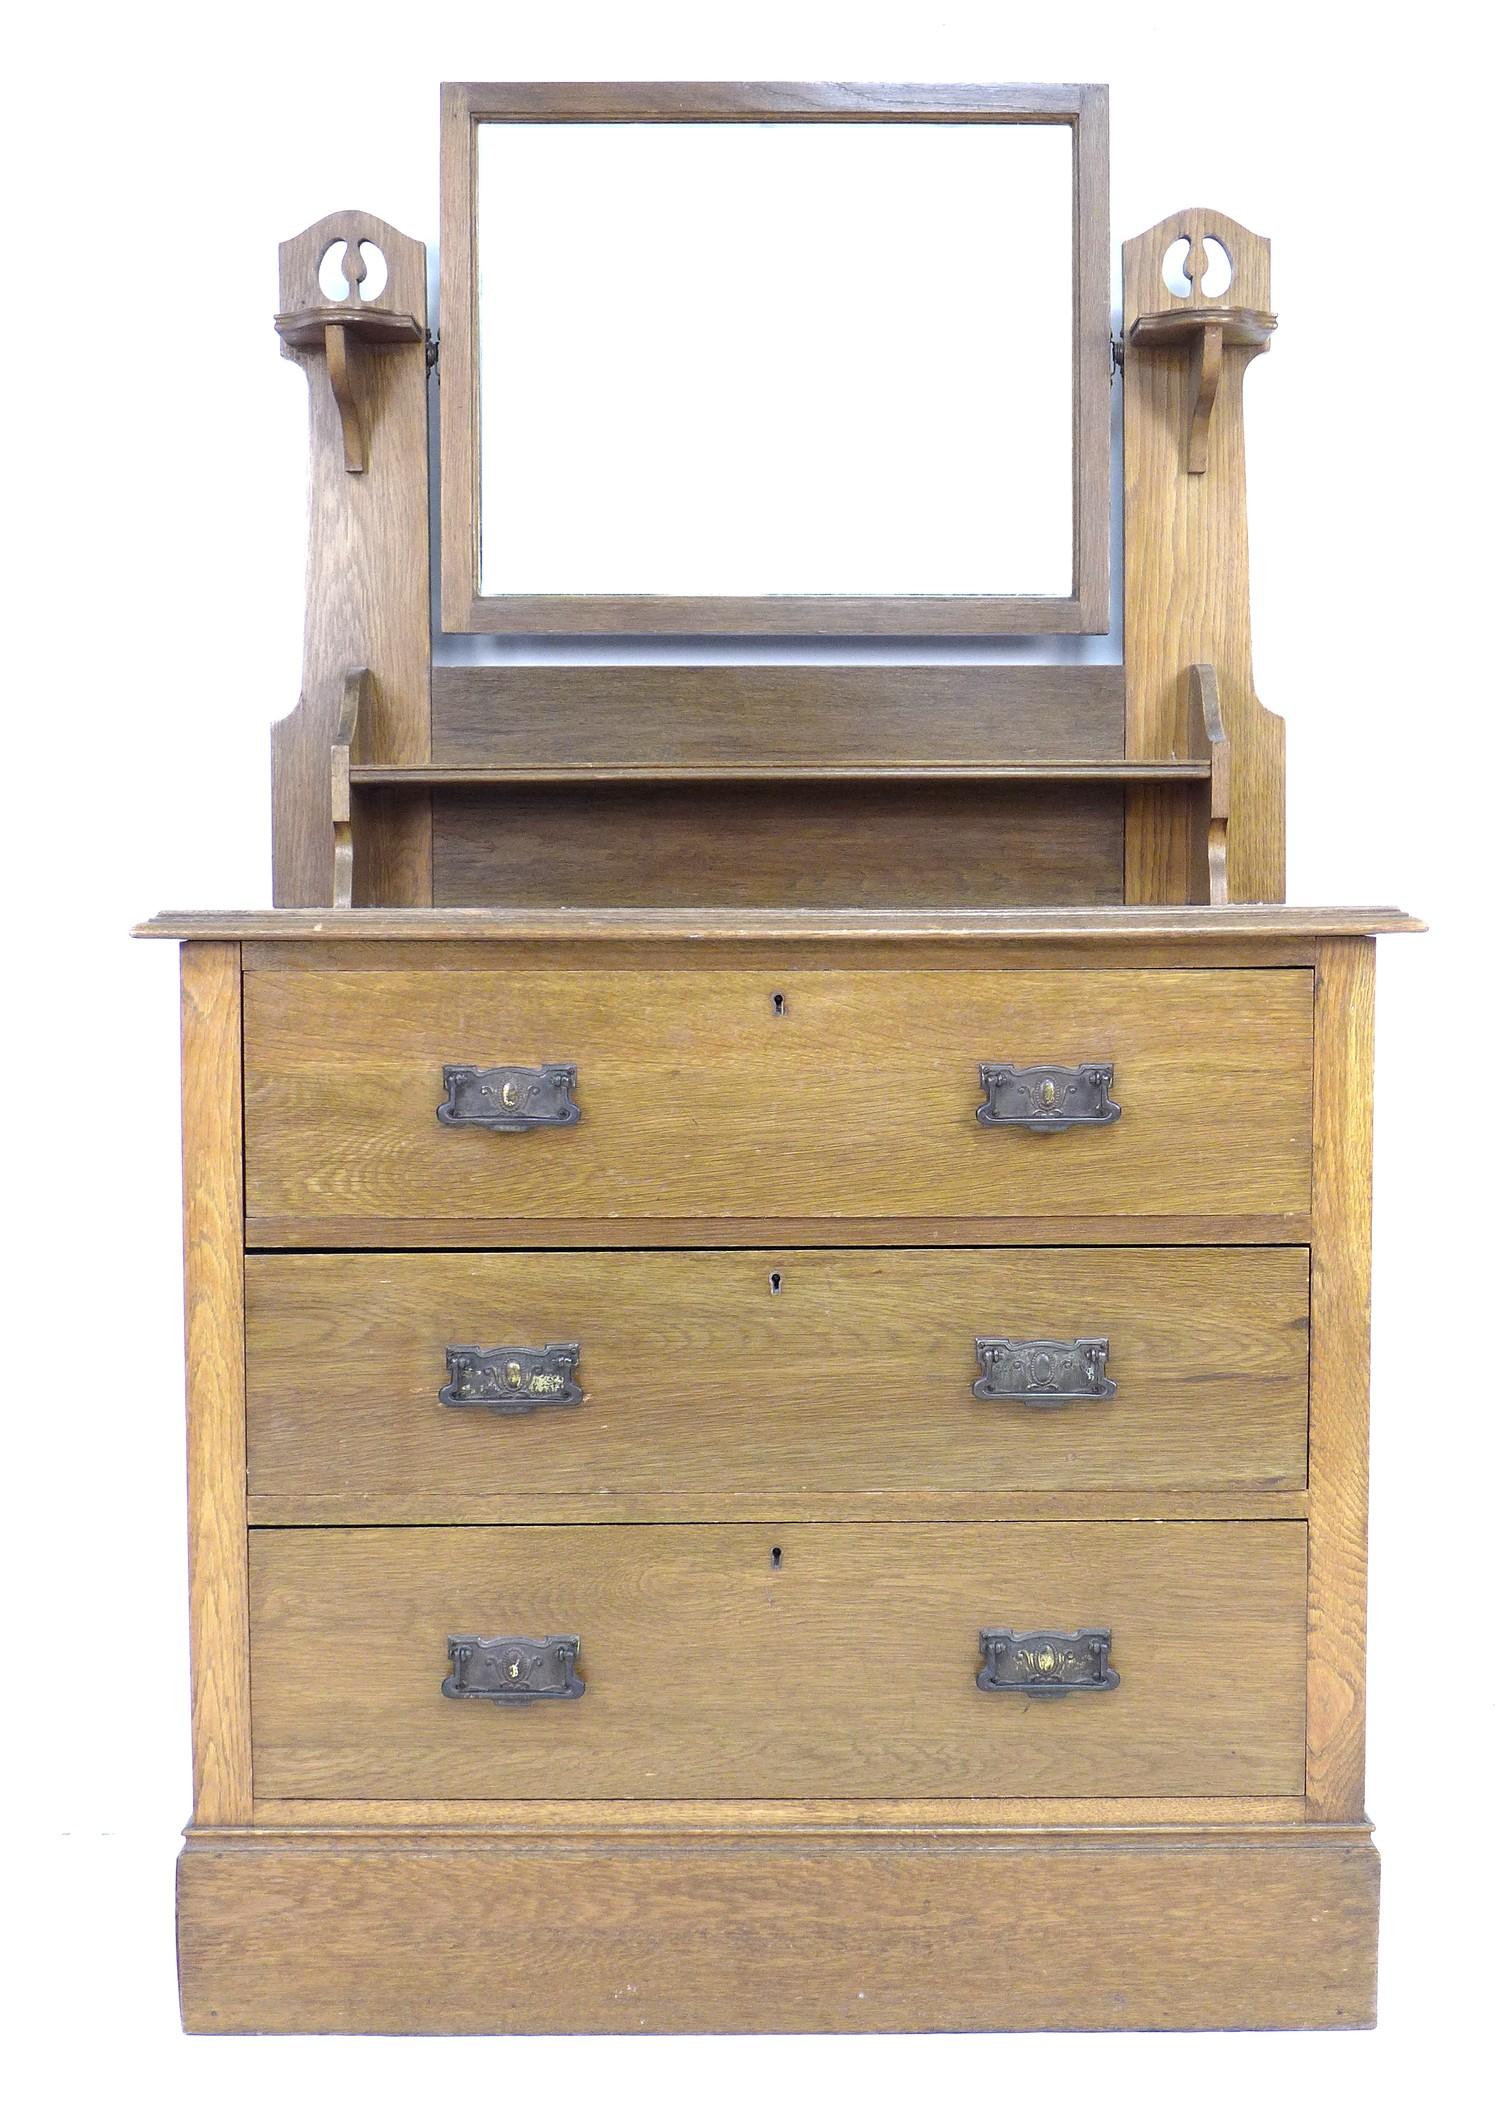 A Art Nouveau oak dressing chest, mirror over three drawers, 91.5 by 48 by 151cm high. - Image 2 of 4